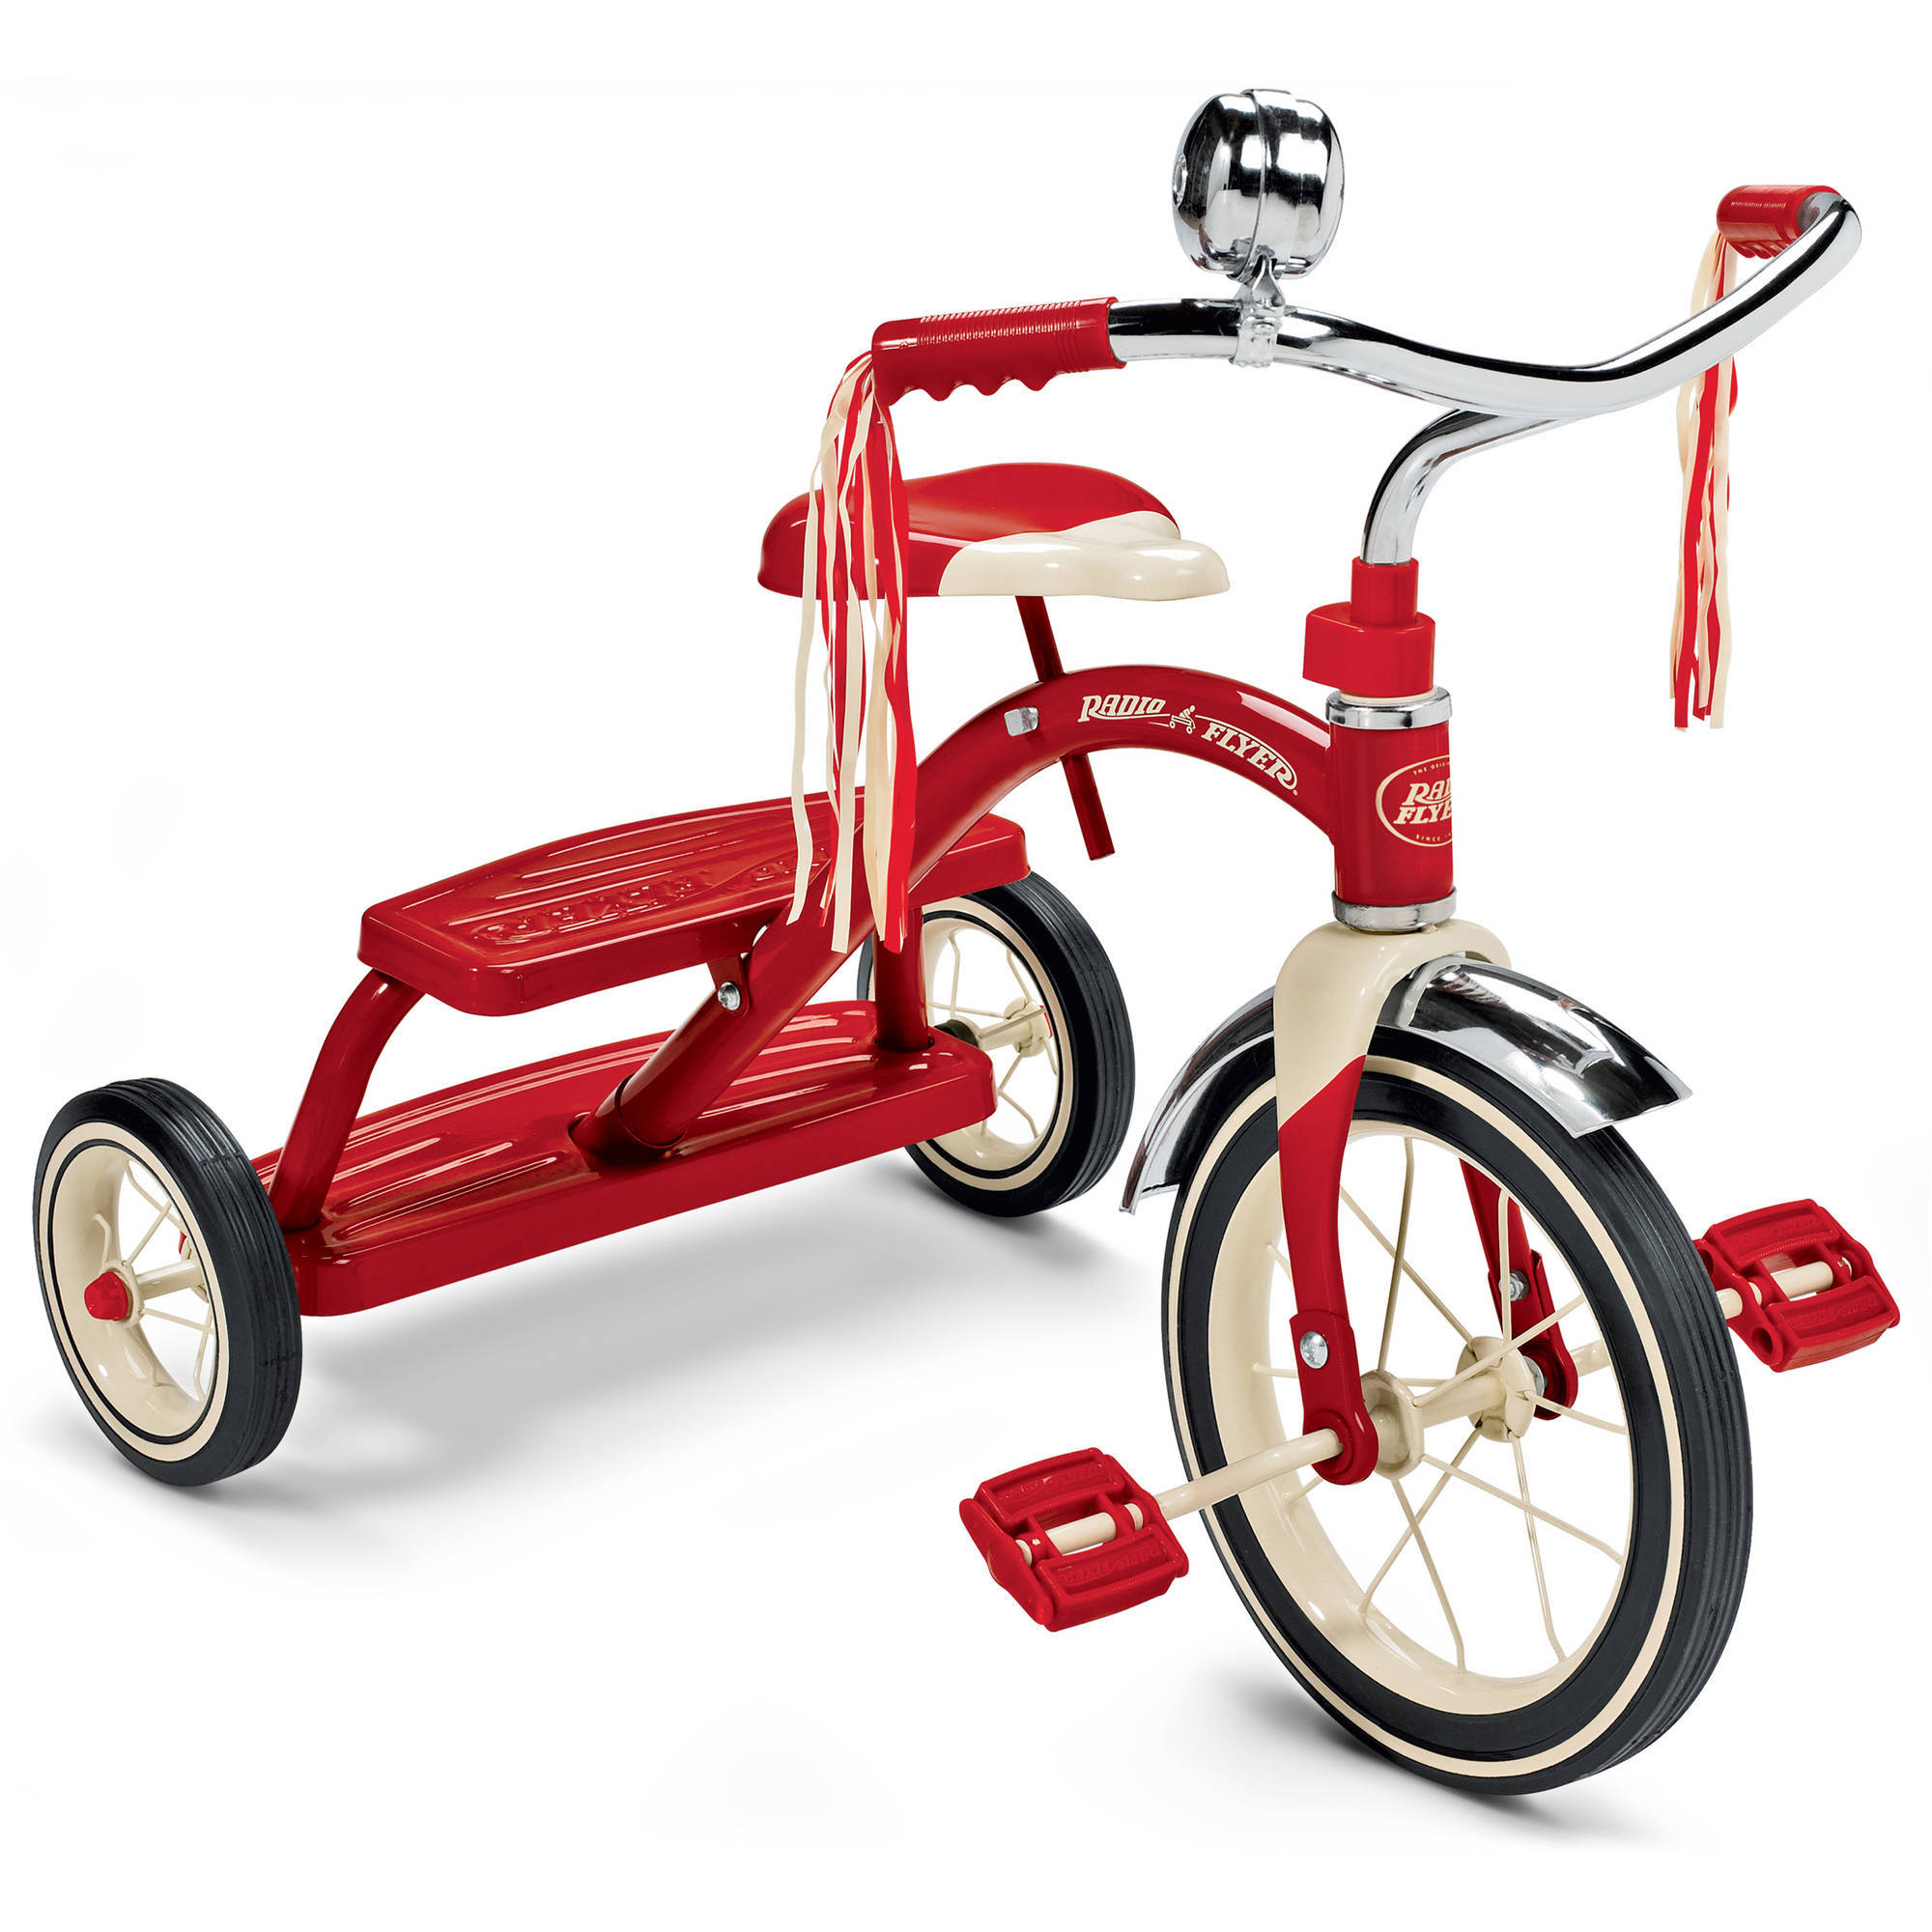 Radio Flyer, Classic Red Dual Deck Tricycle, 12" Front Wheel, Red - image 1 of 9